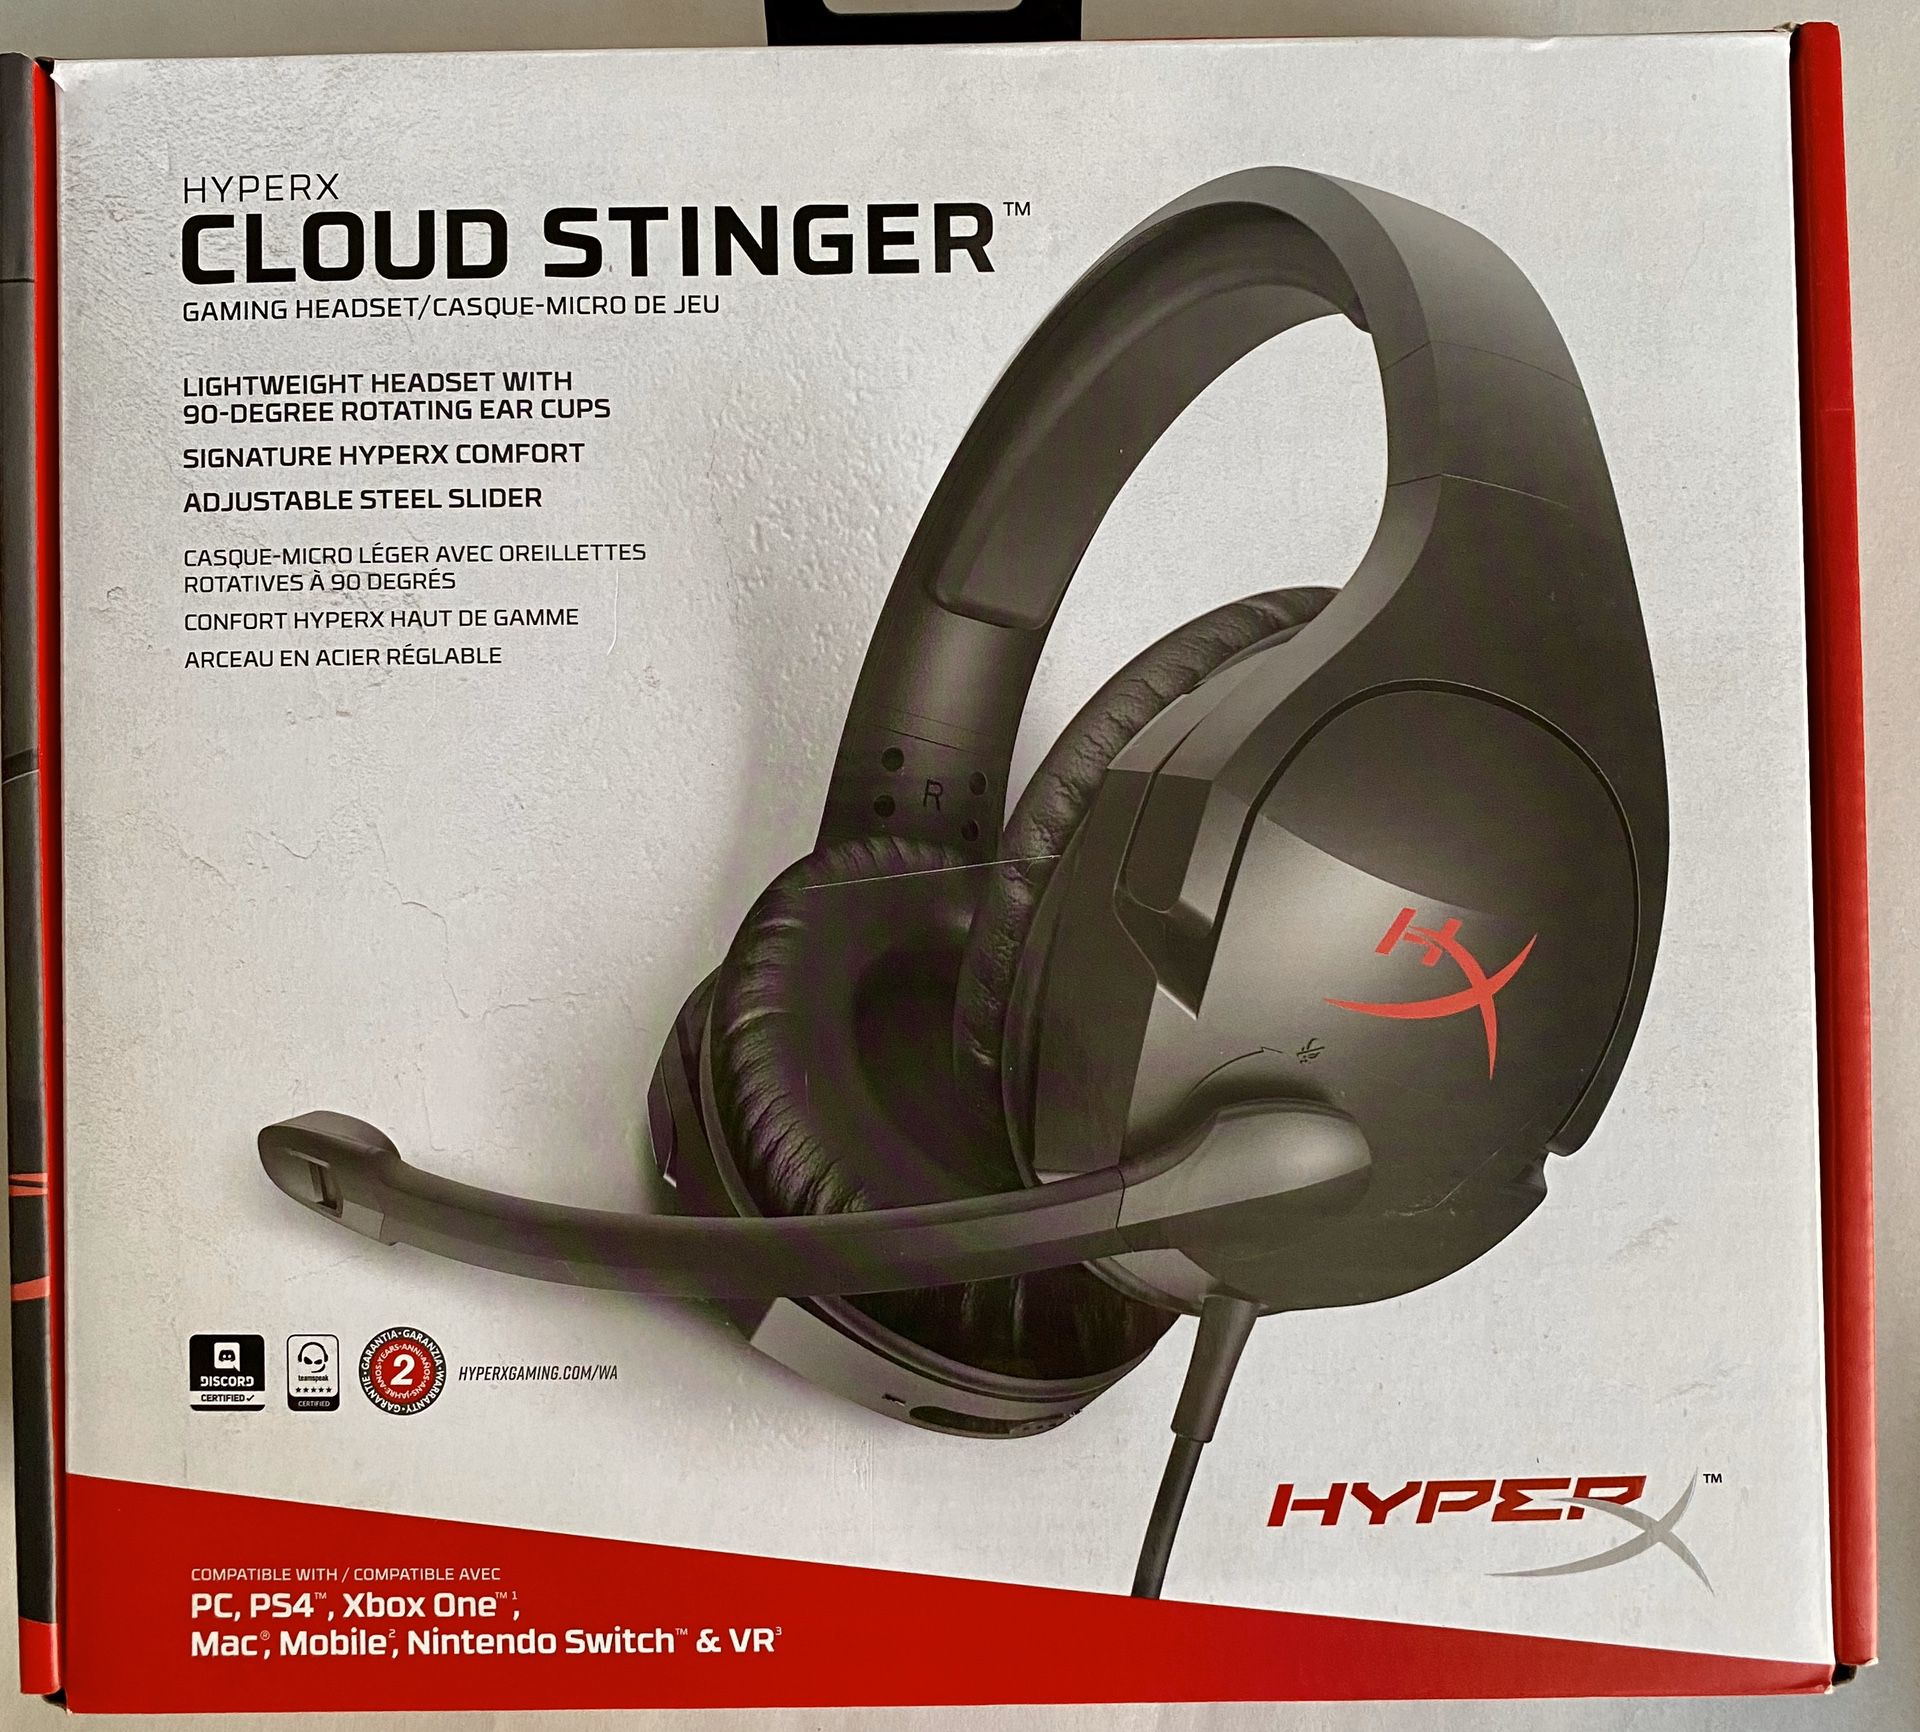 HyperX - Cloud Stinger Wired Stereo Gaming Headset for PC, PS4, Xbox One*, Nintendo Wii U, Mobile Devices - Red/Black NEW NEVER USED